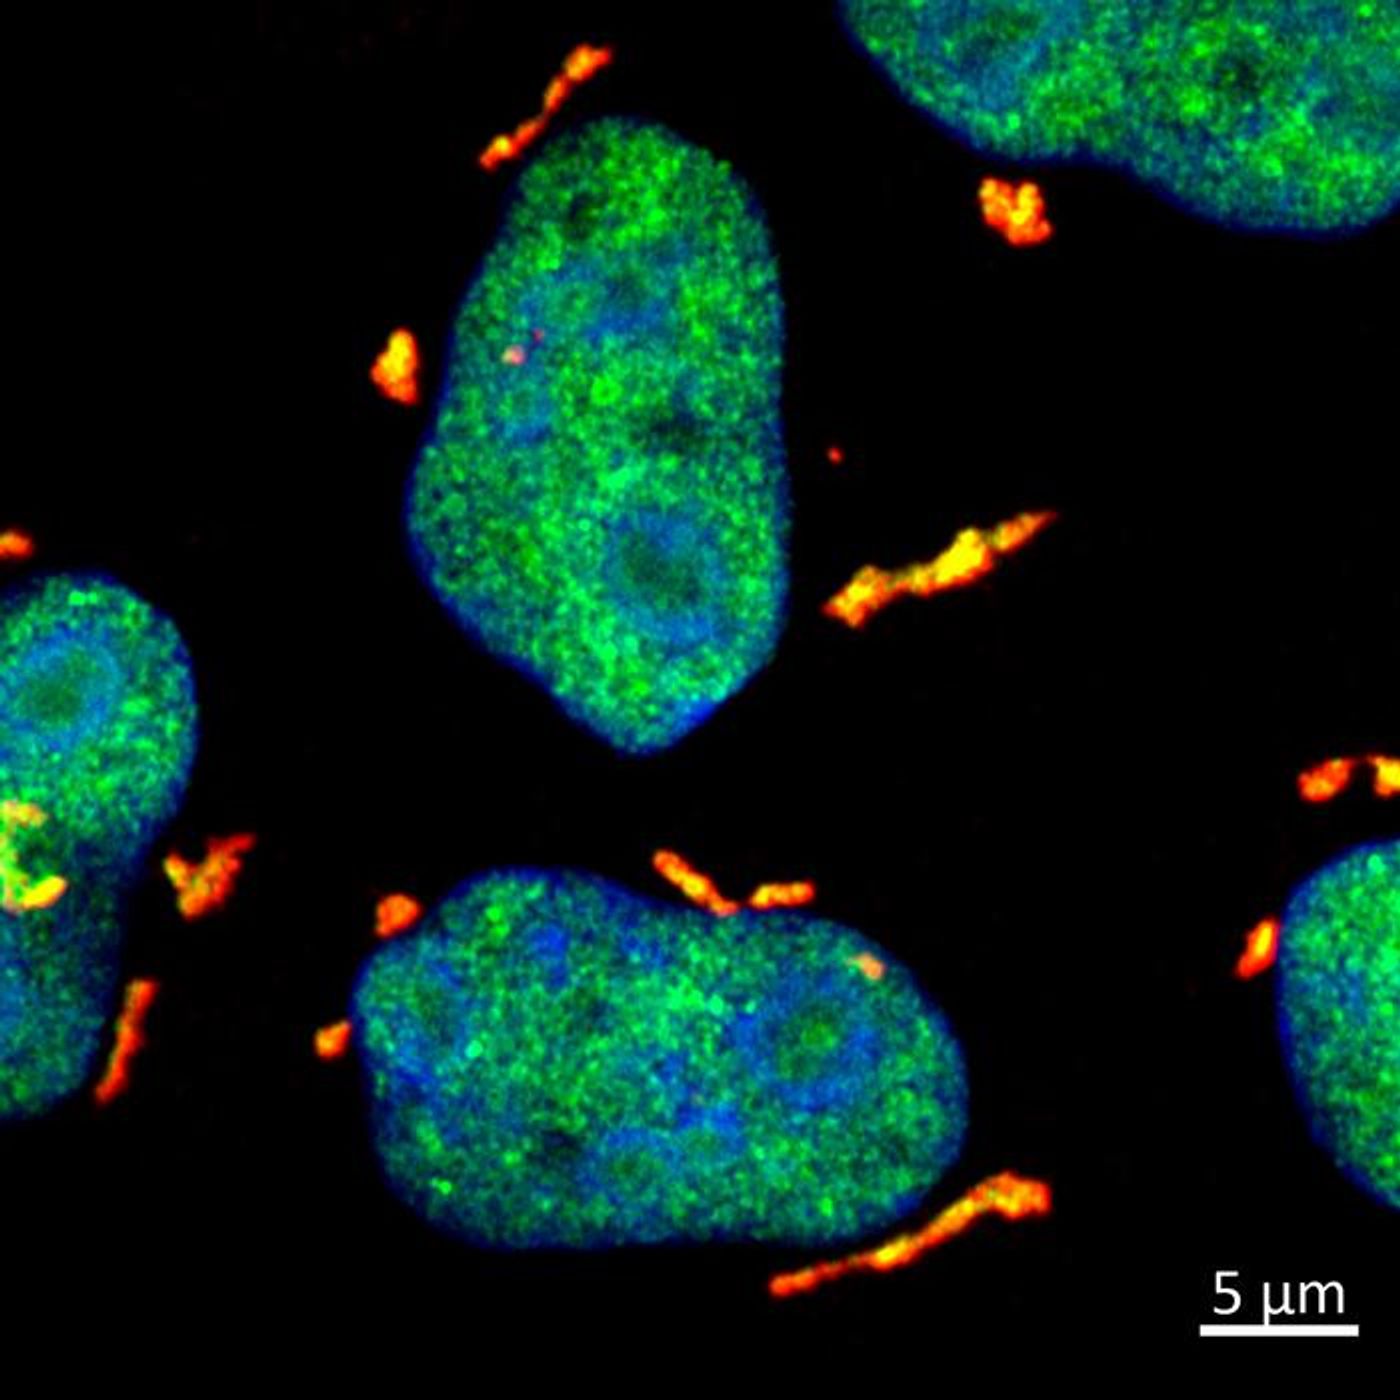 After UV-induced RNA damage in HeLa cells, DHX9 (green) and G3BP1 (red) form stress granules in the cytoplasm. Cell nuclei are blue. / Credit: © MPI of Immunobiology and Epigenetics, Akhtar